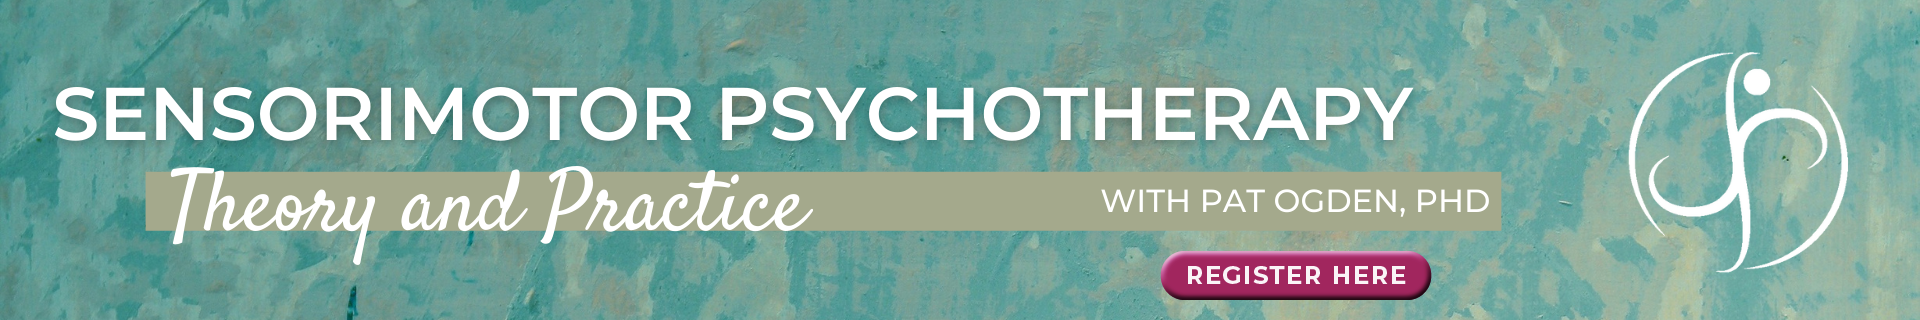 Sensorimotor Psychotherapy: Theory and Practice